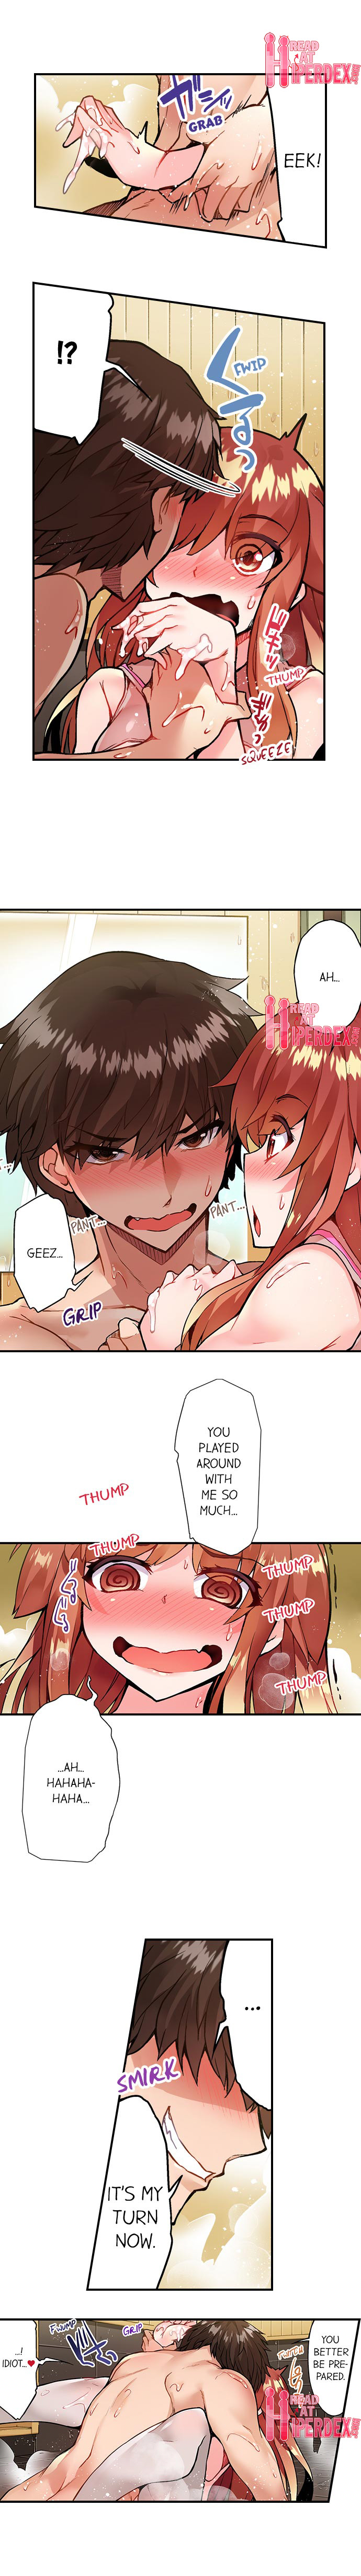 Traditional Job of Washing Girls’ Body - Chapter 103 Page 9